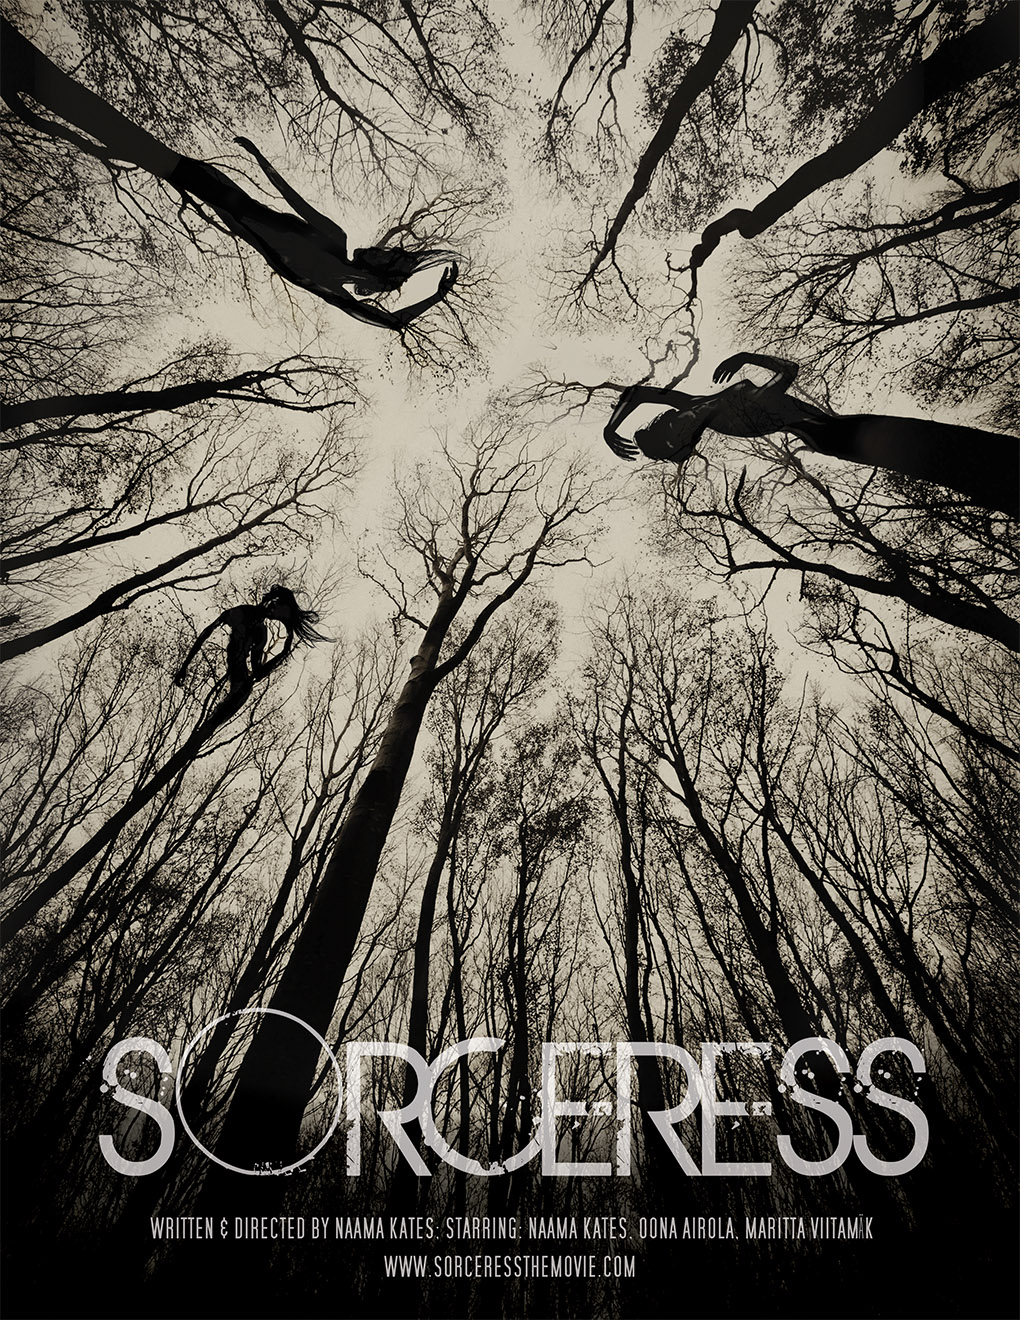 Sorceress movie with Naama Kates, poster by designSimple